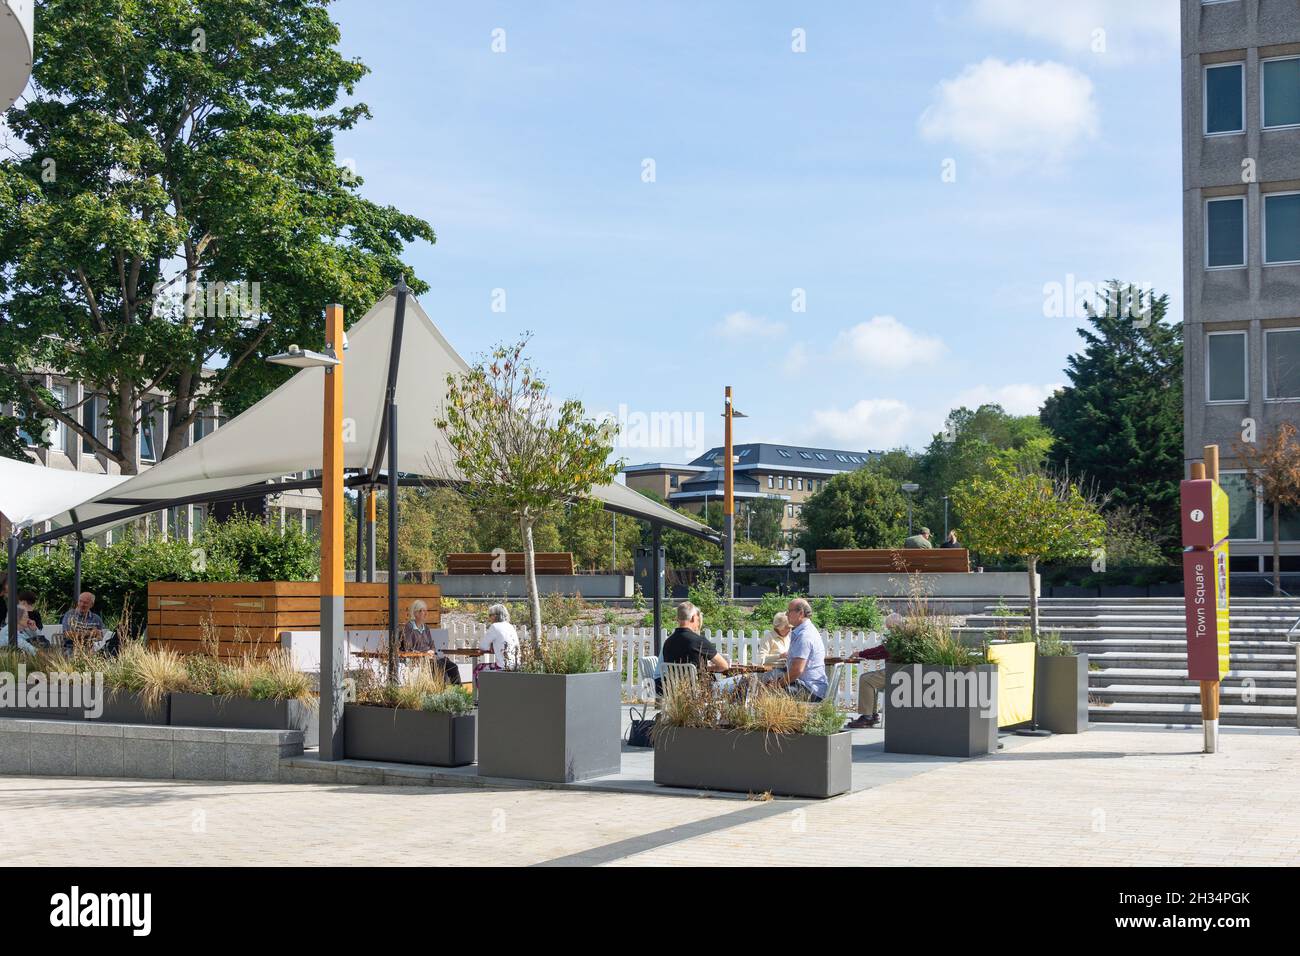 Outdoor seating terrace, Fuego Restaurant, The Lexicon Shopping Centre, Bracknell, Berkshire, England, United Kingdom Stock Photo